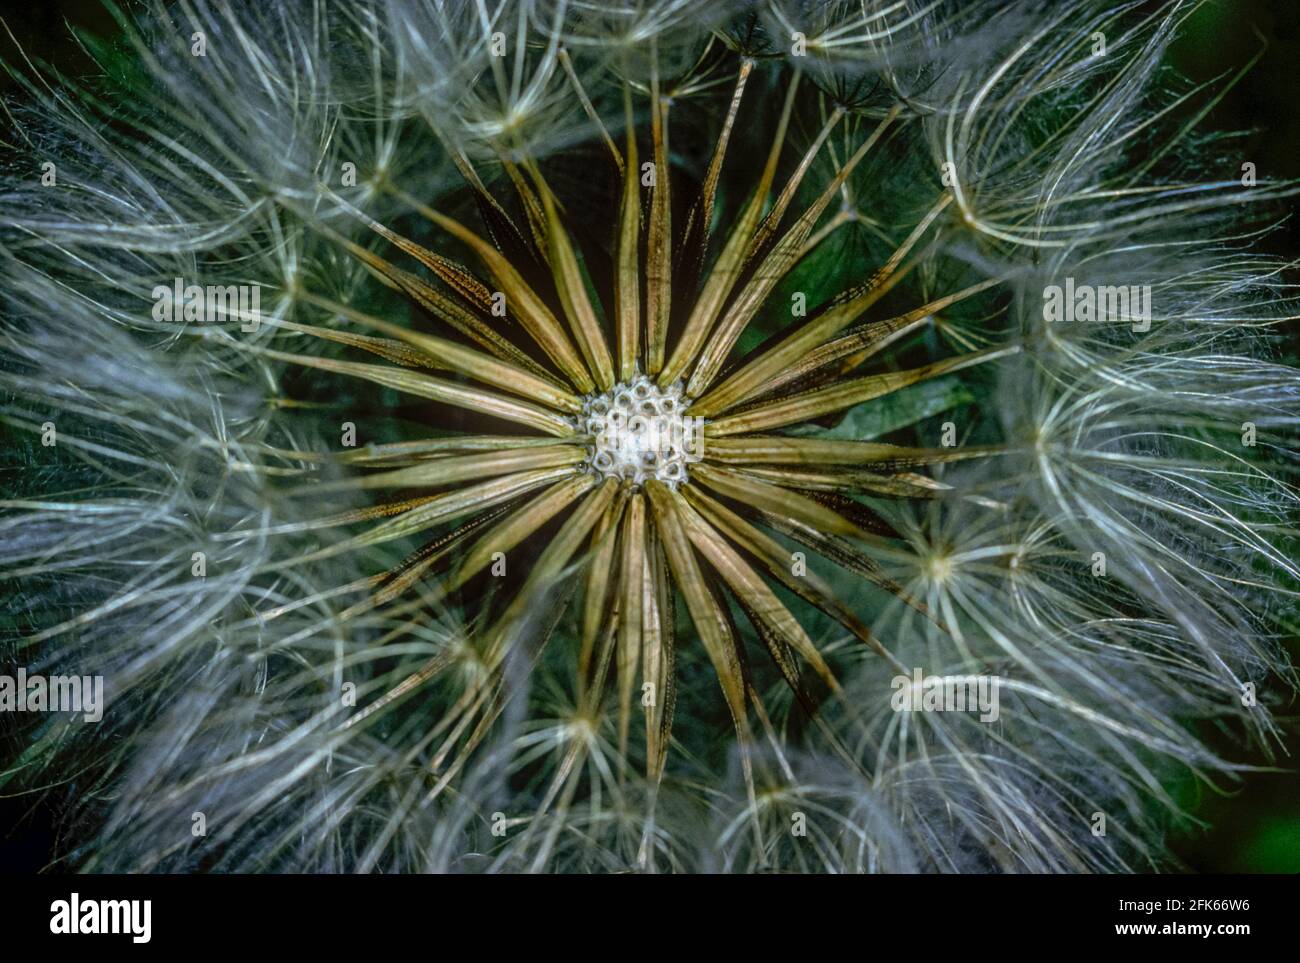 Close up of Goats Beard (tragopogon dubius) interior of seed head, Morrison Colorado USA. Photo taken in June from original Kodachrome transparency. Stock Photo